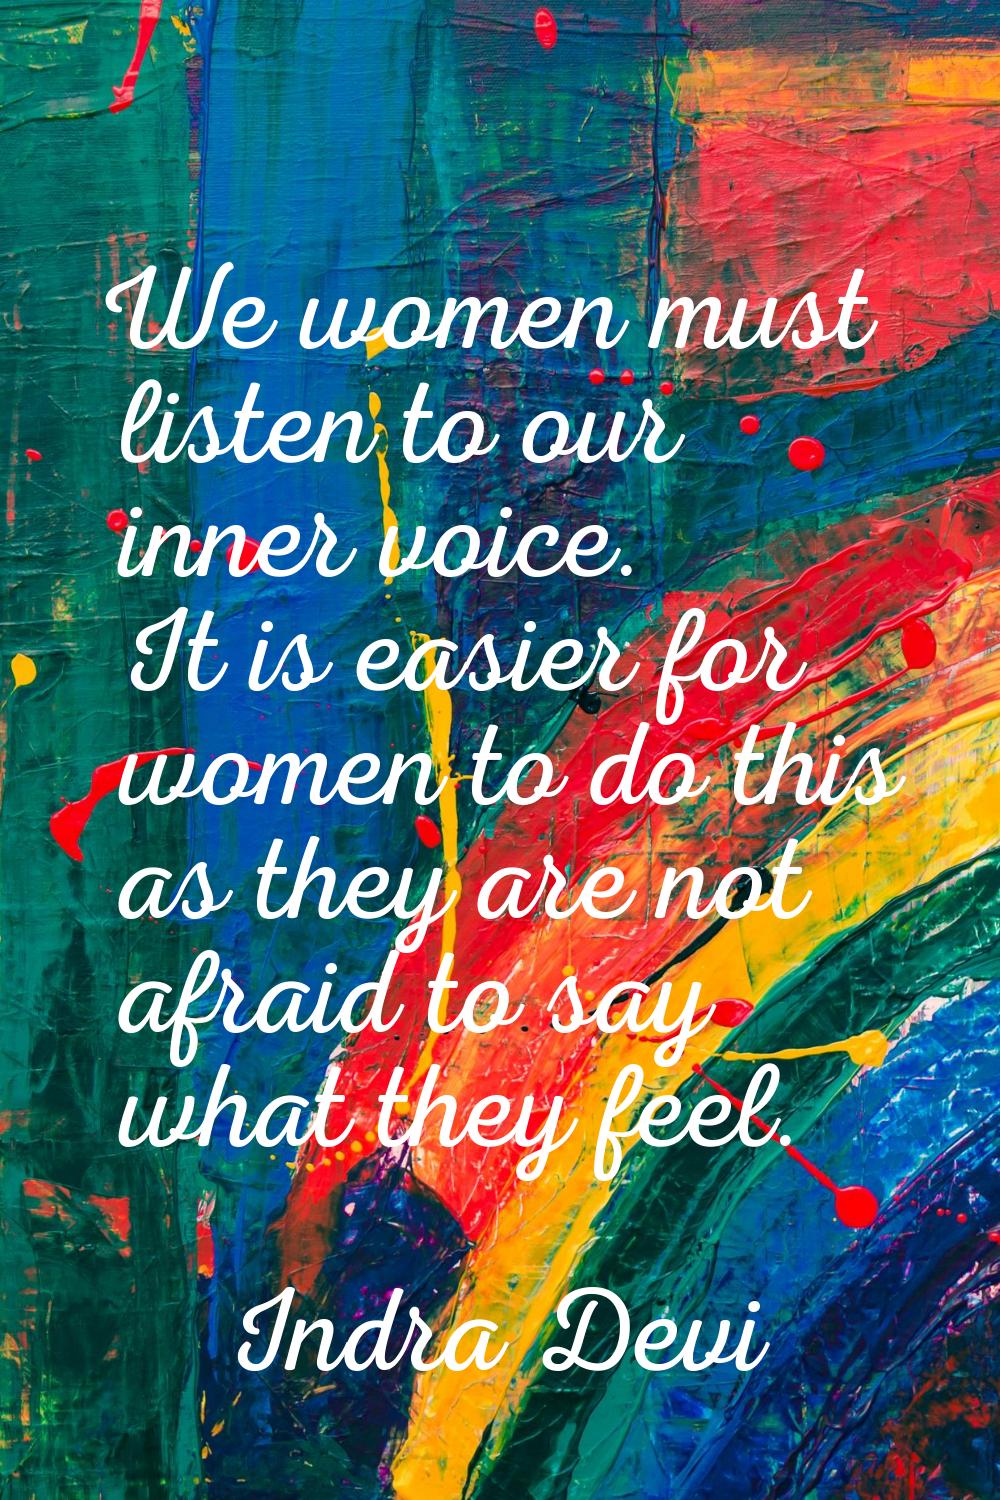 We women must listen to our inner voice. It is easier for women to do this as they are not afraid t